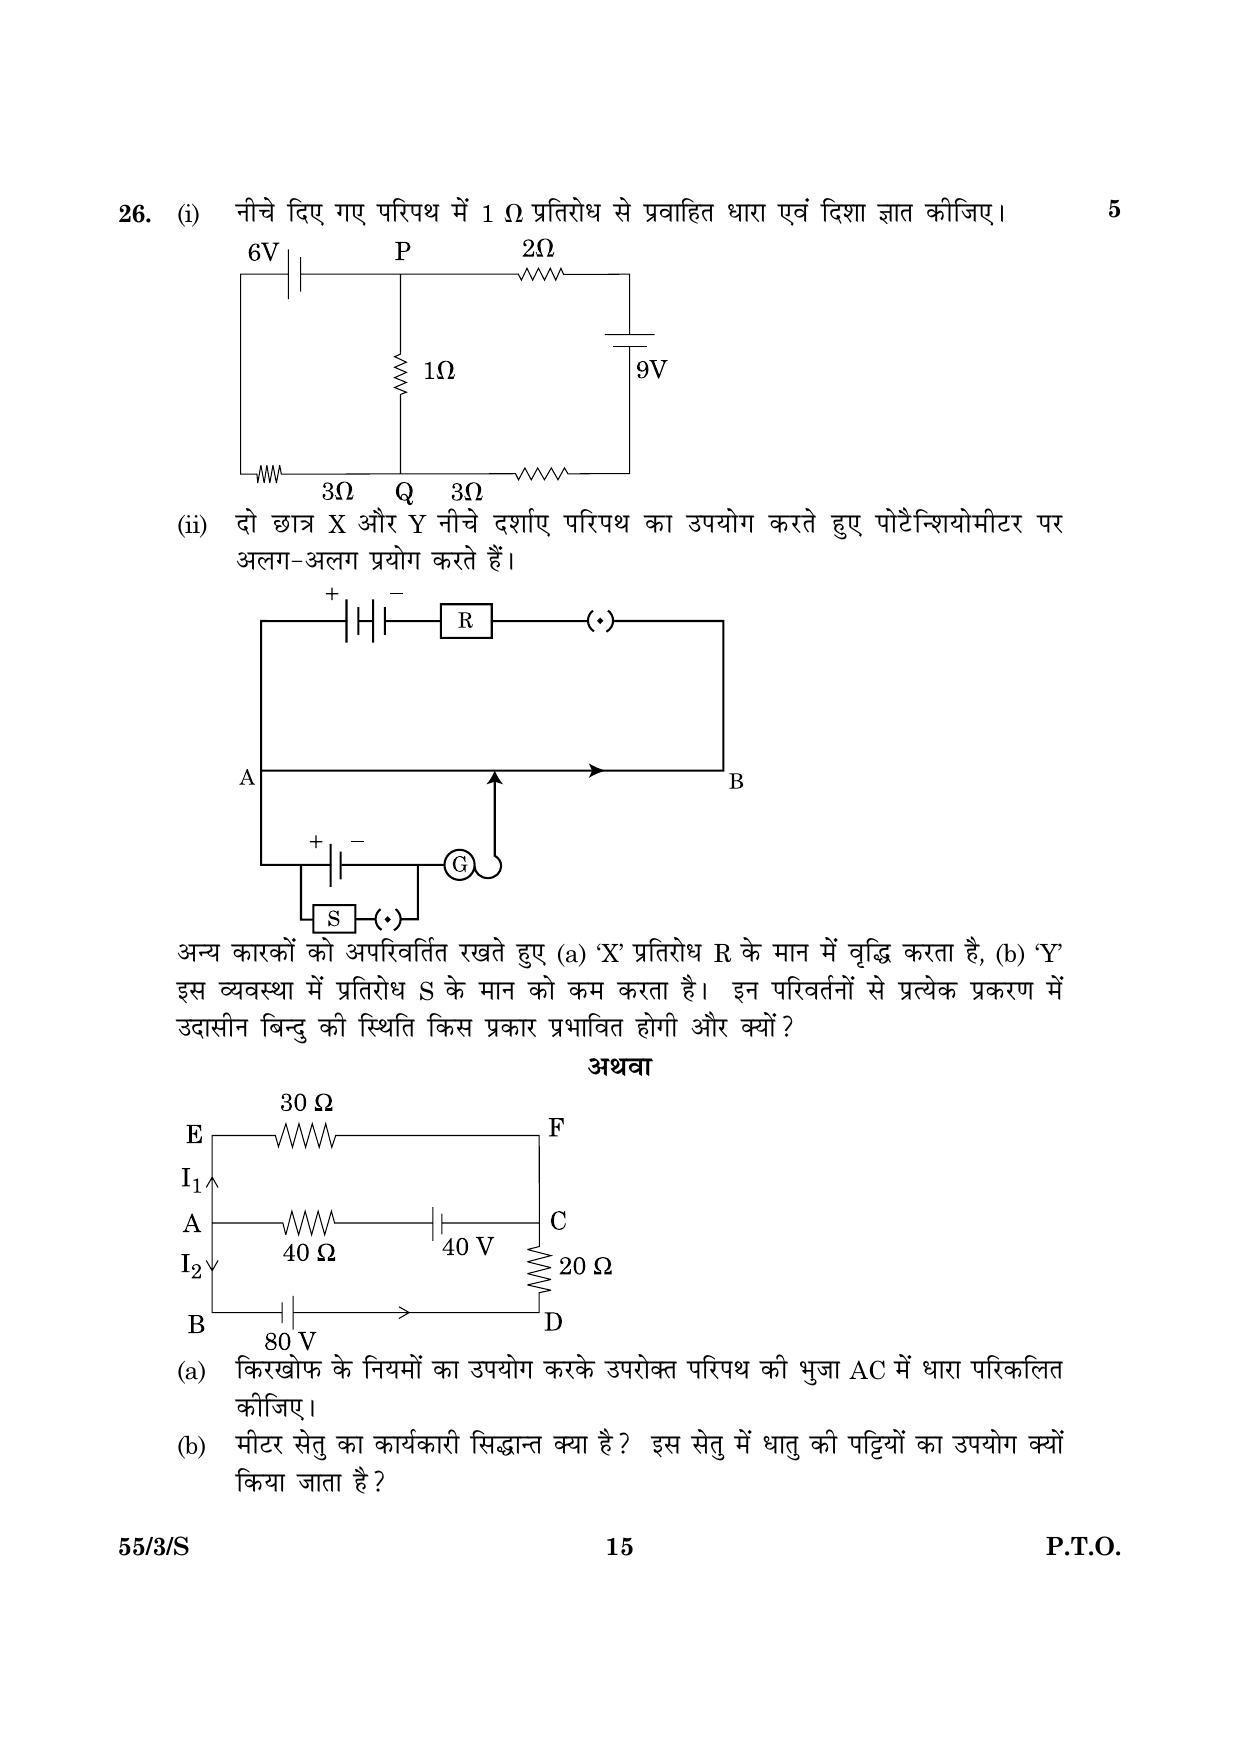 CBSE Class 12 055 Set 3 S Physics Theory 2016 Question Paper - Page 15